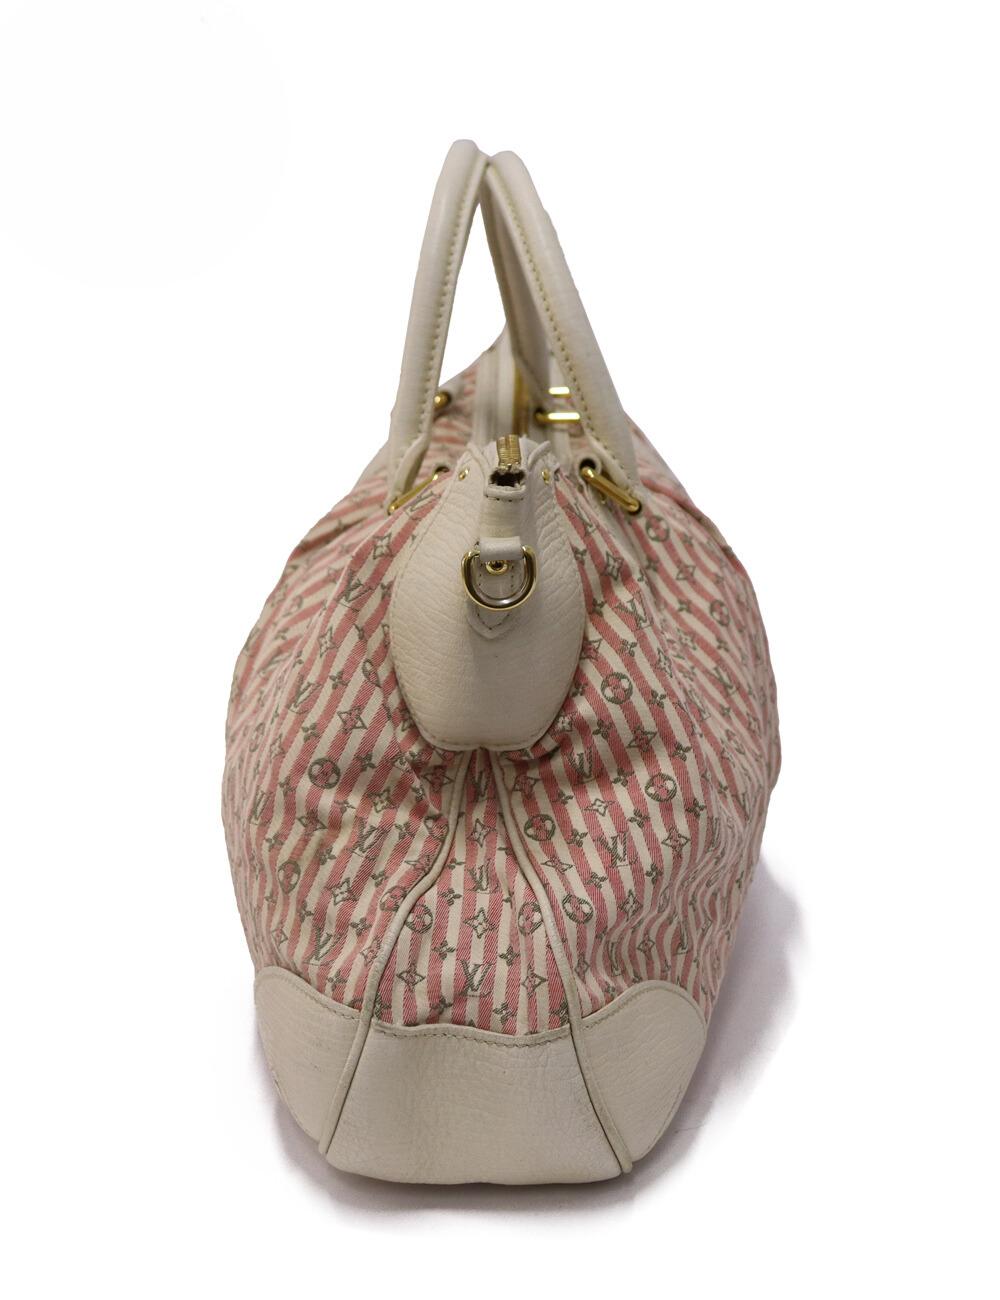 Louis Vuitton Croisette Marina Mini Lin Bag White and Pink Canvas, Features a double rigid handle, a removable shoulder strap and two interior slip pockets.

Material: Fabric and leather
Hardware: Gold
Height:  28cm
Width: 45cm
Depth: 14cm
Handle